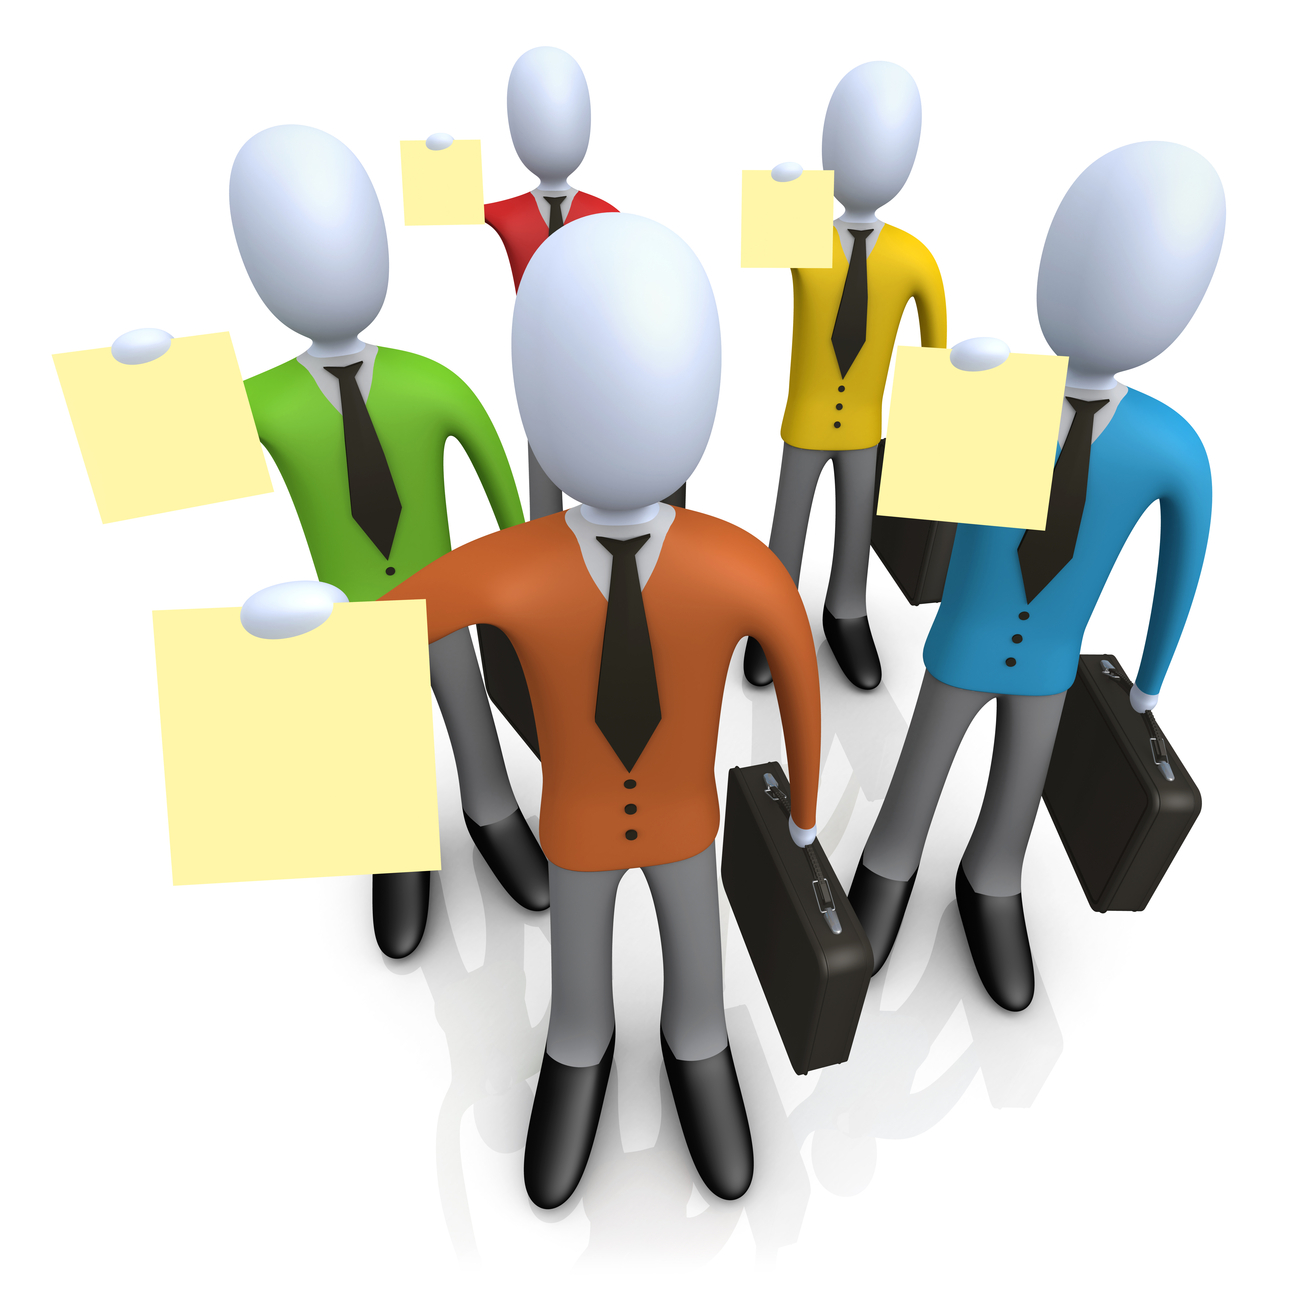 Clipart Illustration Of A Group Of Businessmen In Colorful Shirts